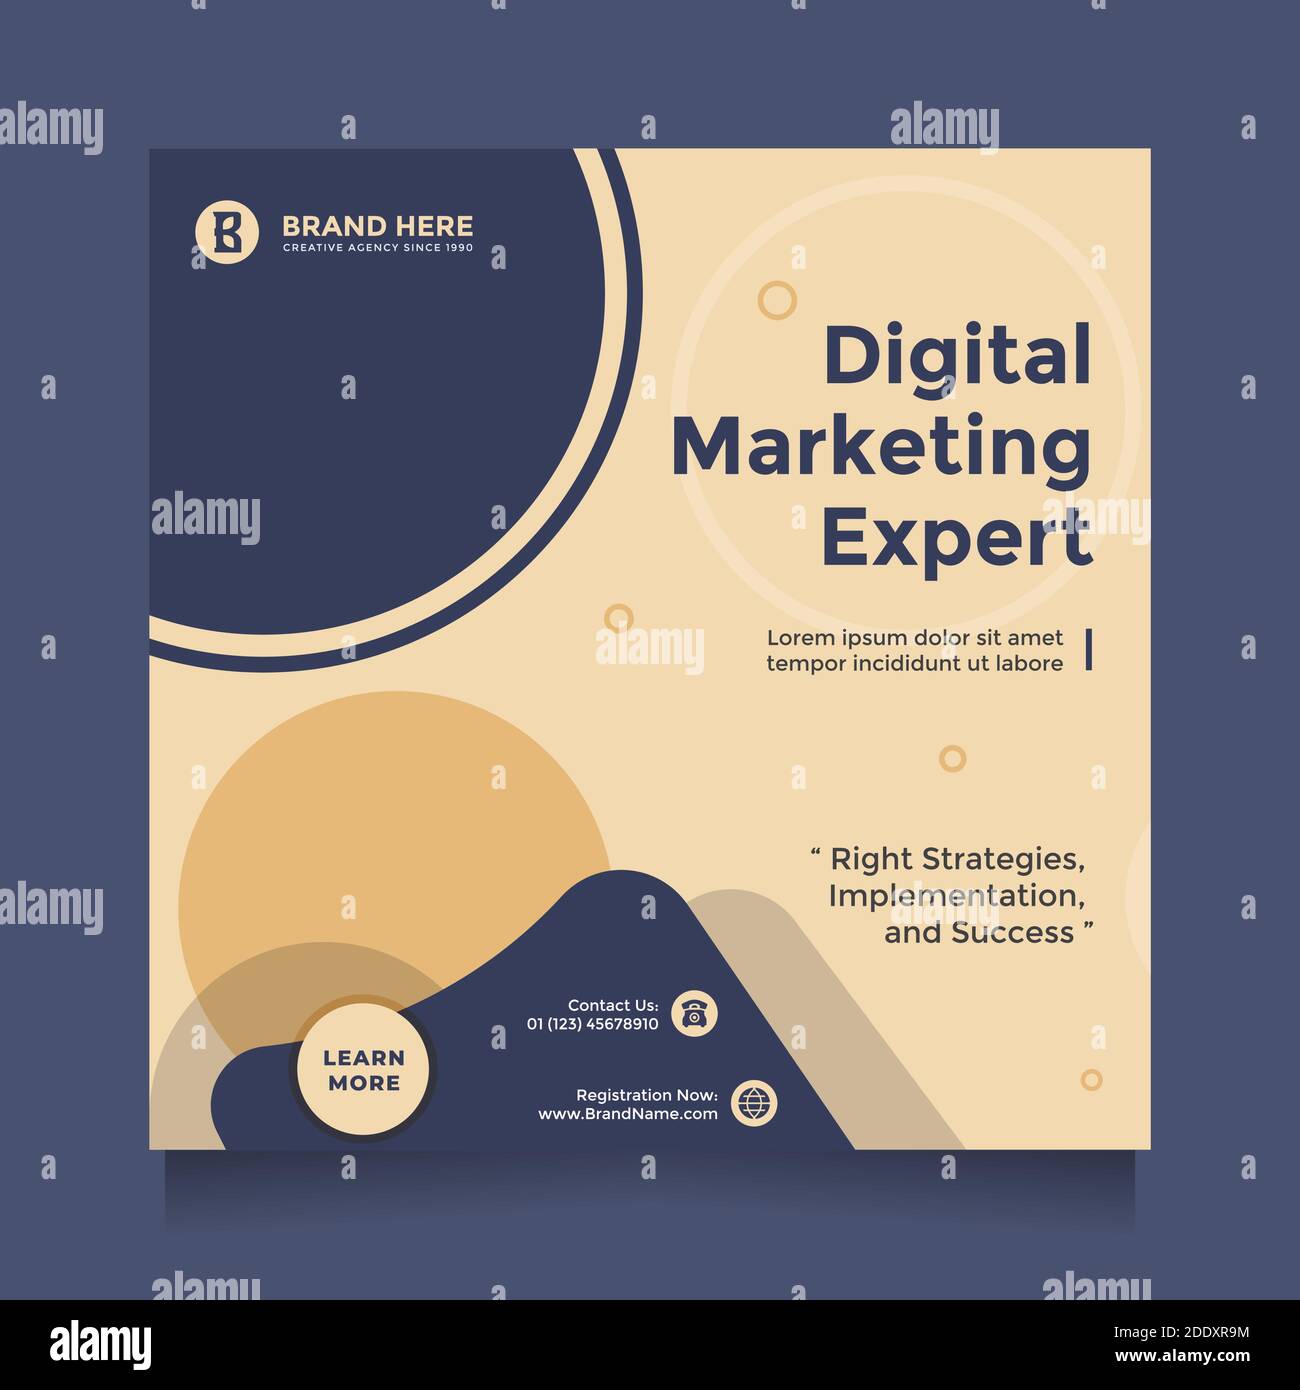 5 Ways on how to be a Digital marketing Expert - OnlineMagz